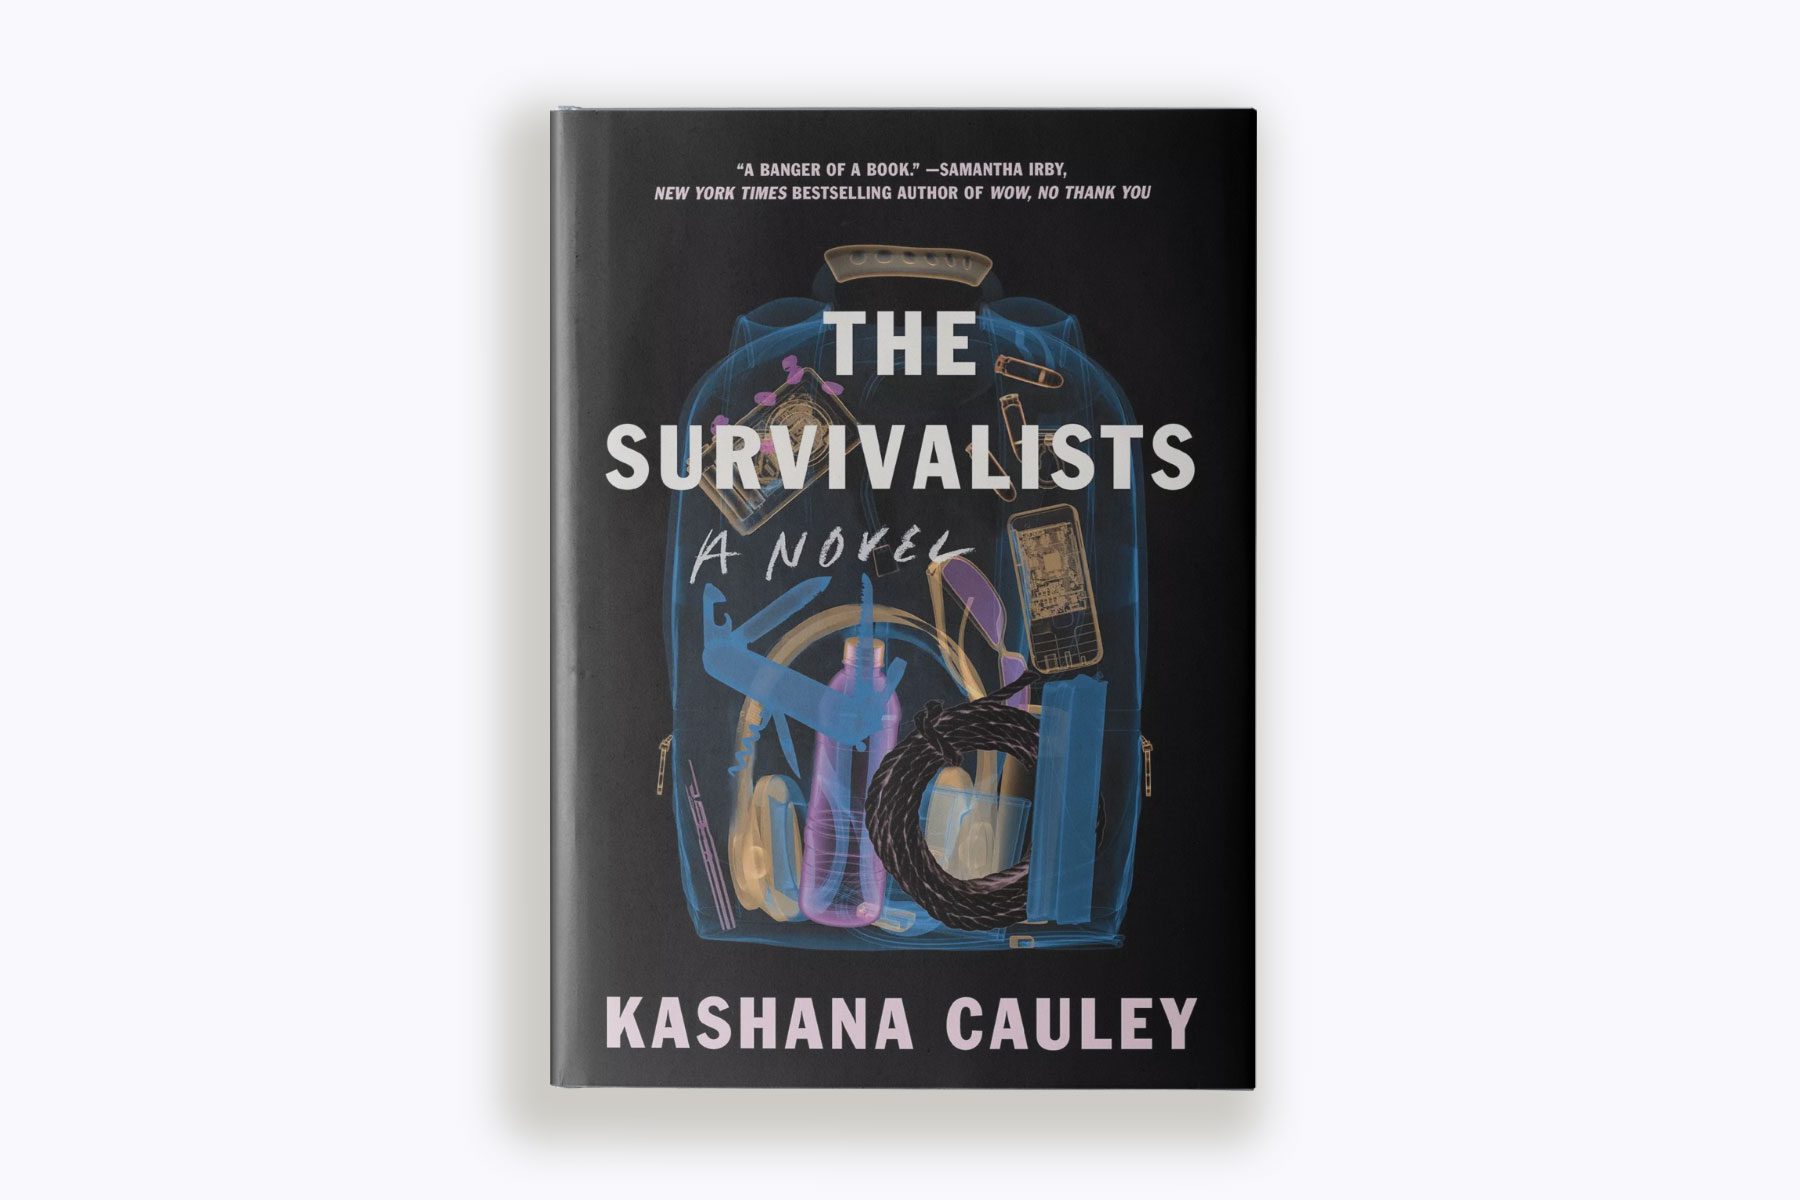 Book cover of "The Survivalists: A Novel" by Kashana Cauley. On the book, an abstract transparent pack is seen with survival tools inside: a bottle, some rope, bullets...